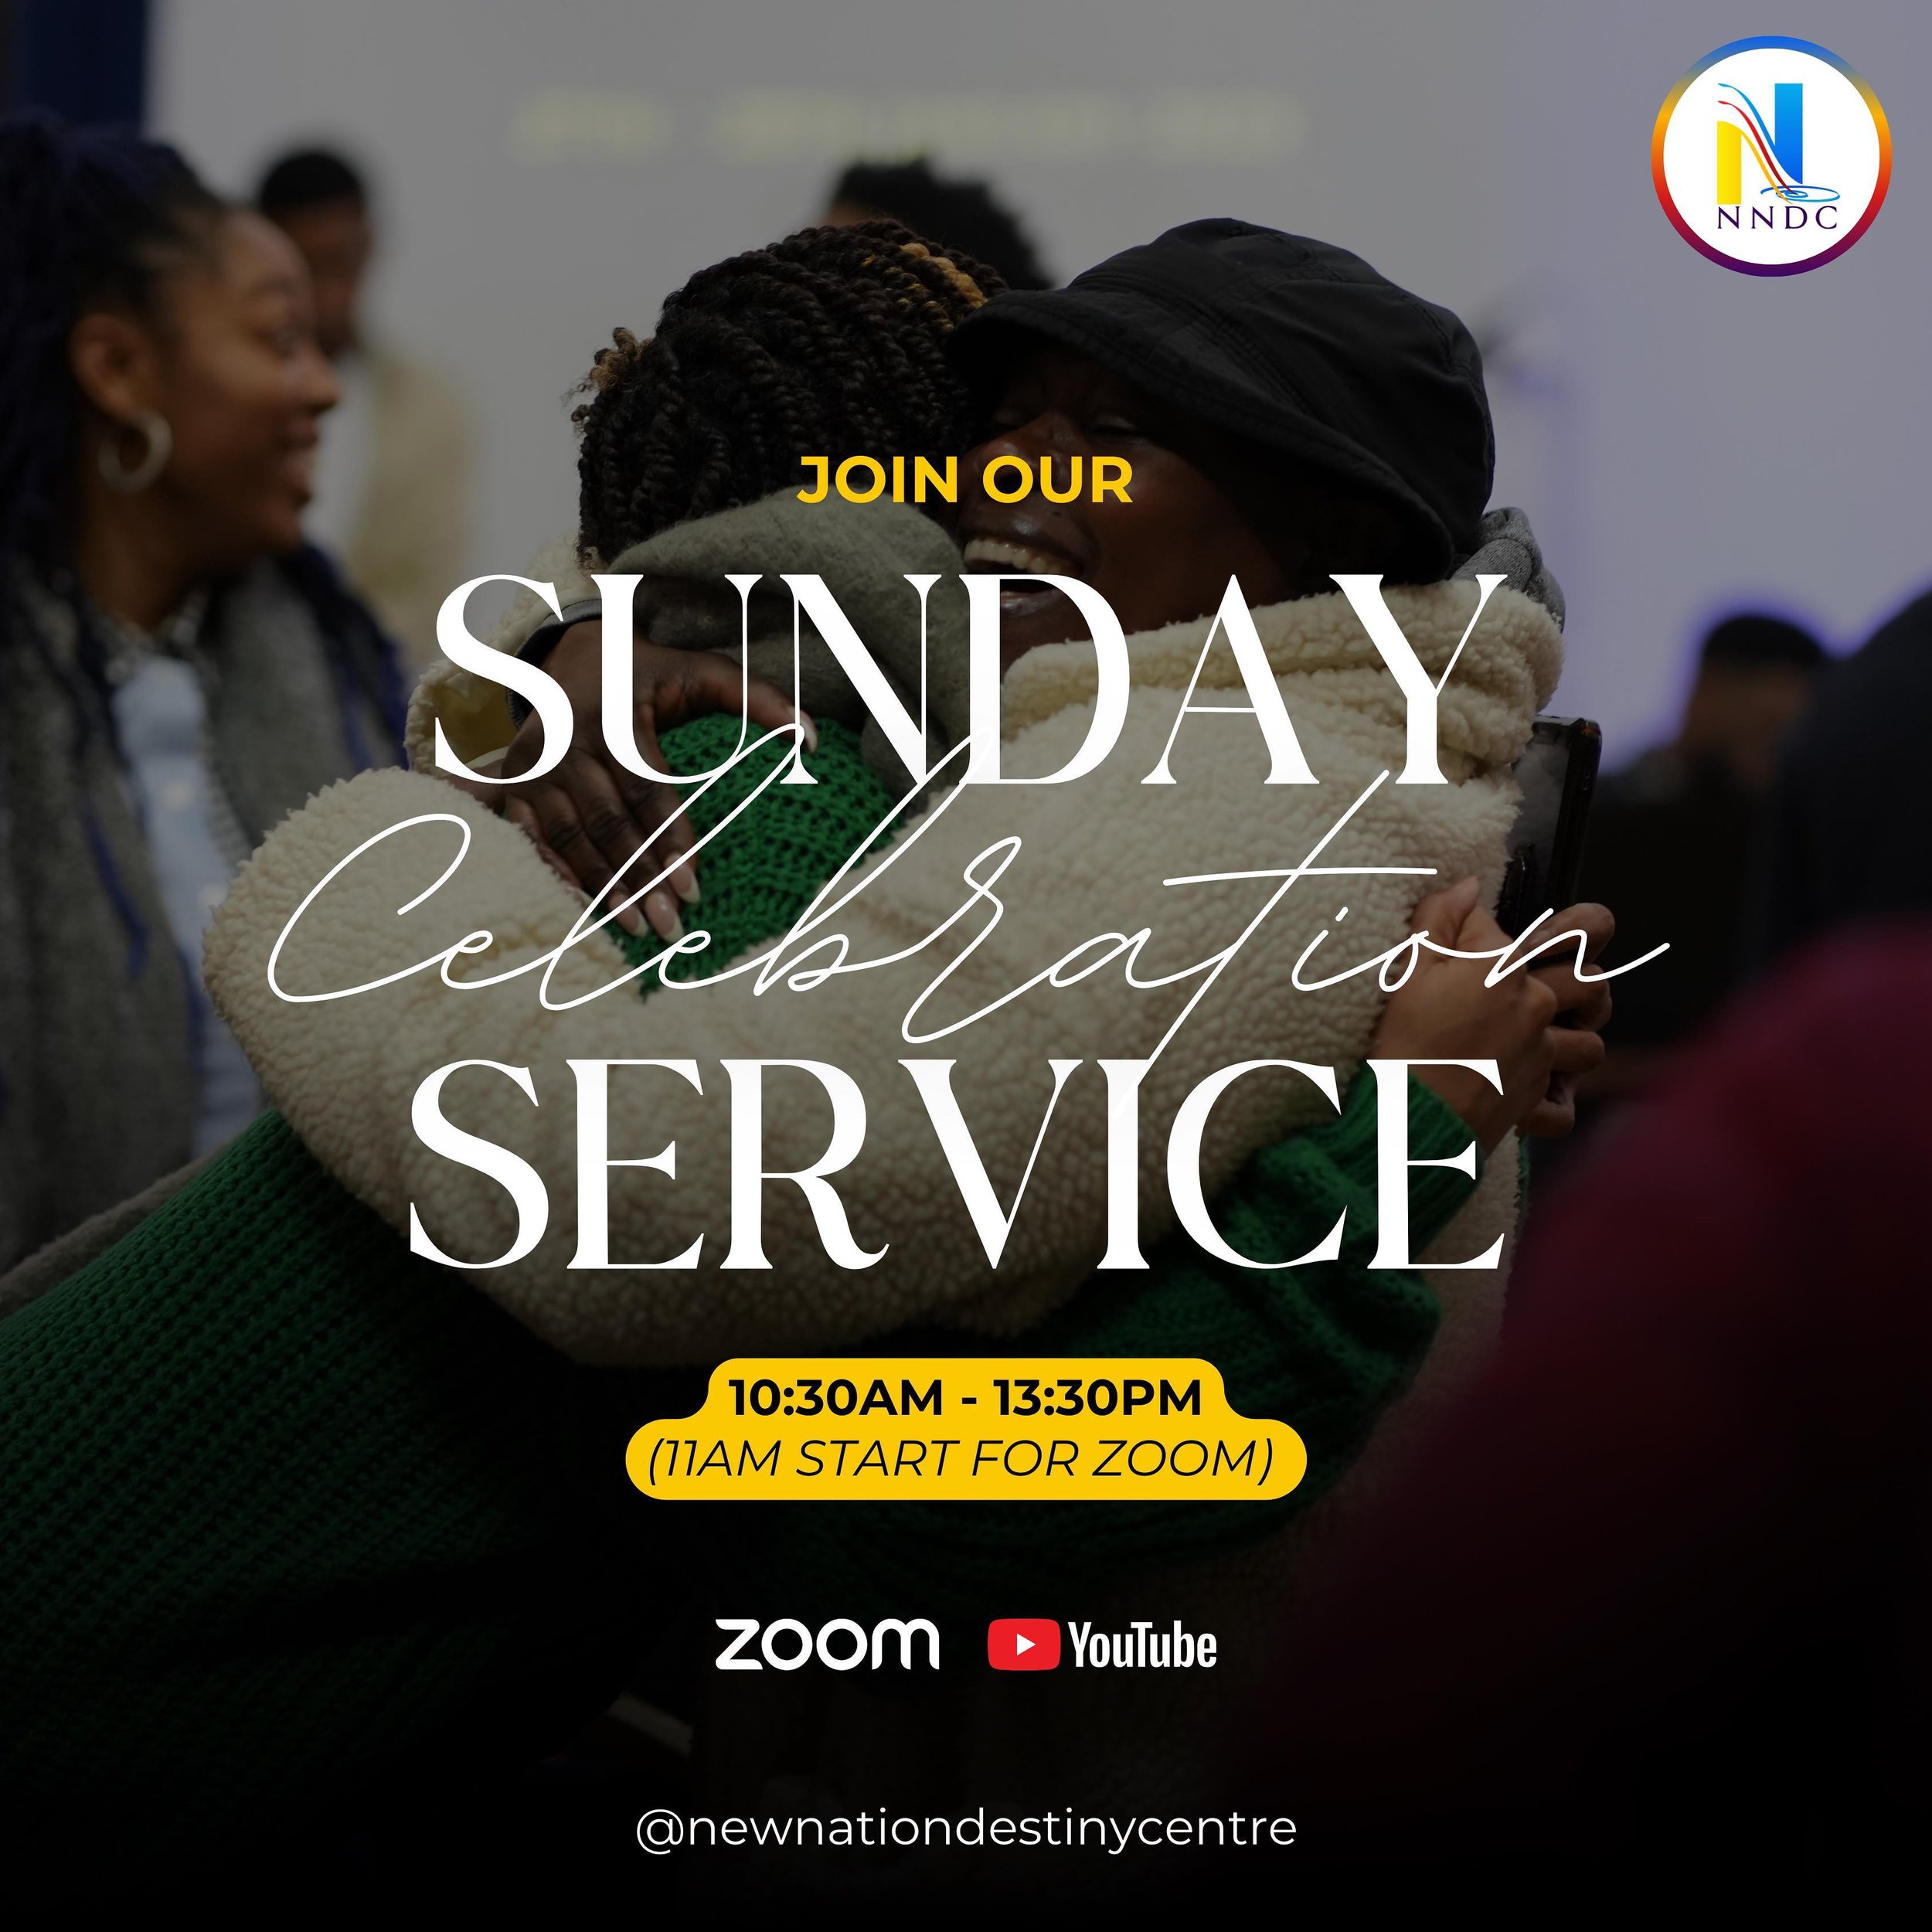 Join Us for our Sunday Service!

This will be a powerful Sunday Celebration Service! Our services are streamed live every Sunday from 11am. 

To watch today&rsquo;s and last week&rsquo;s service visit our YouTube channel @newnationdestinycentre